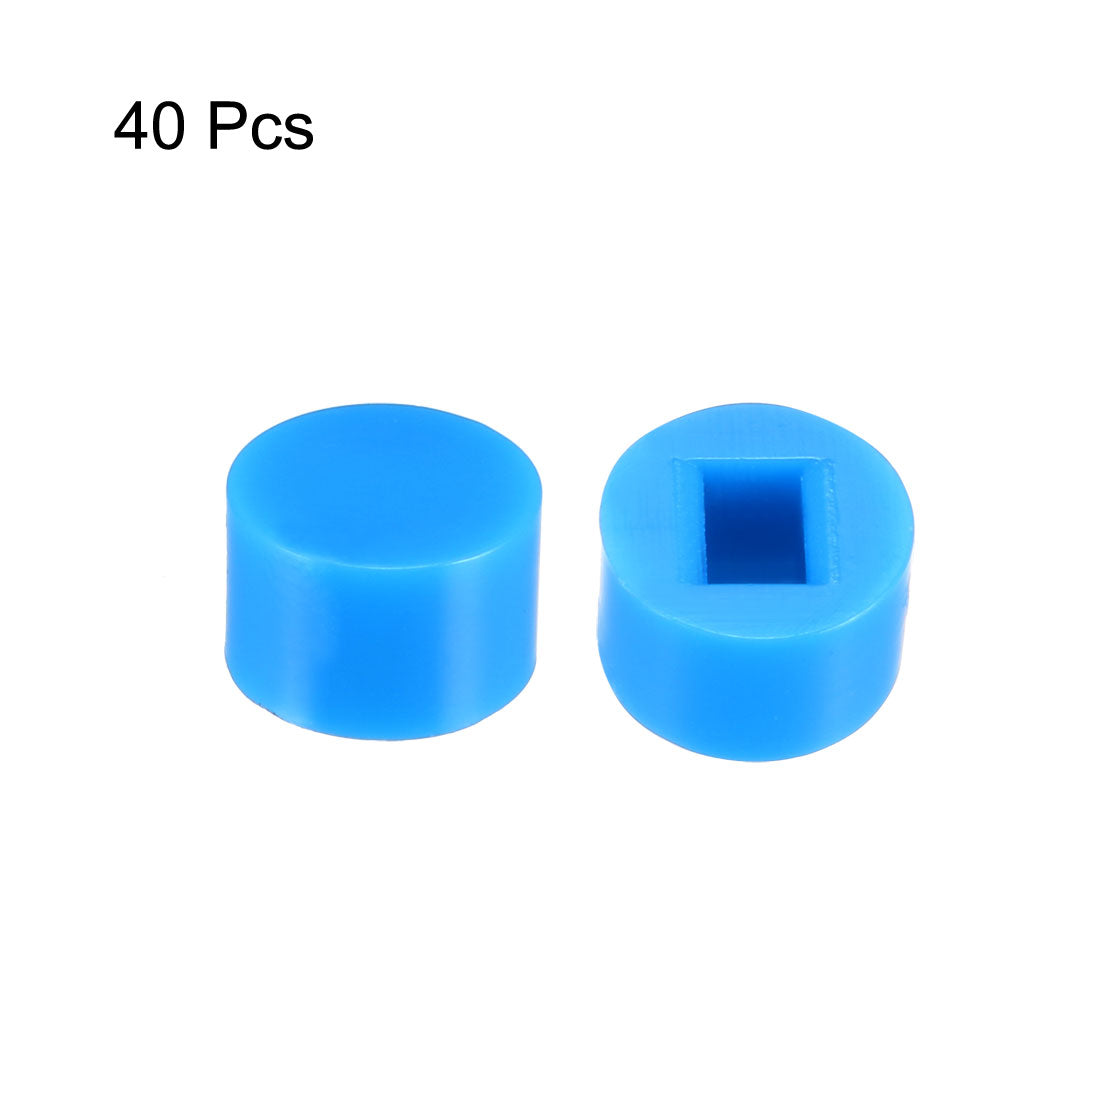 uxcell Uxcell 40Pcs Plastic 6x3.7mm Pushbutton Switch Caps Cover Keycaps Protector for 5.8x5.8 Latching Tactile Switch Blue